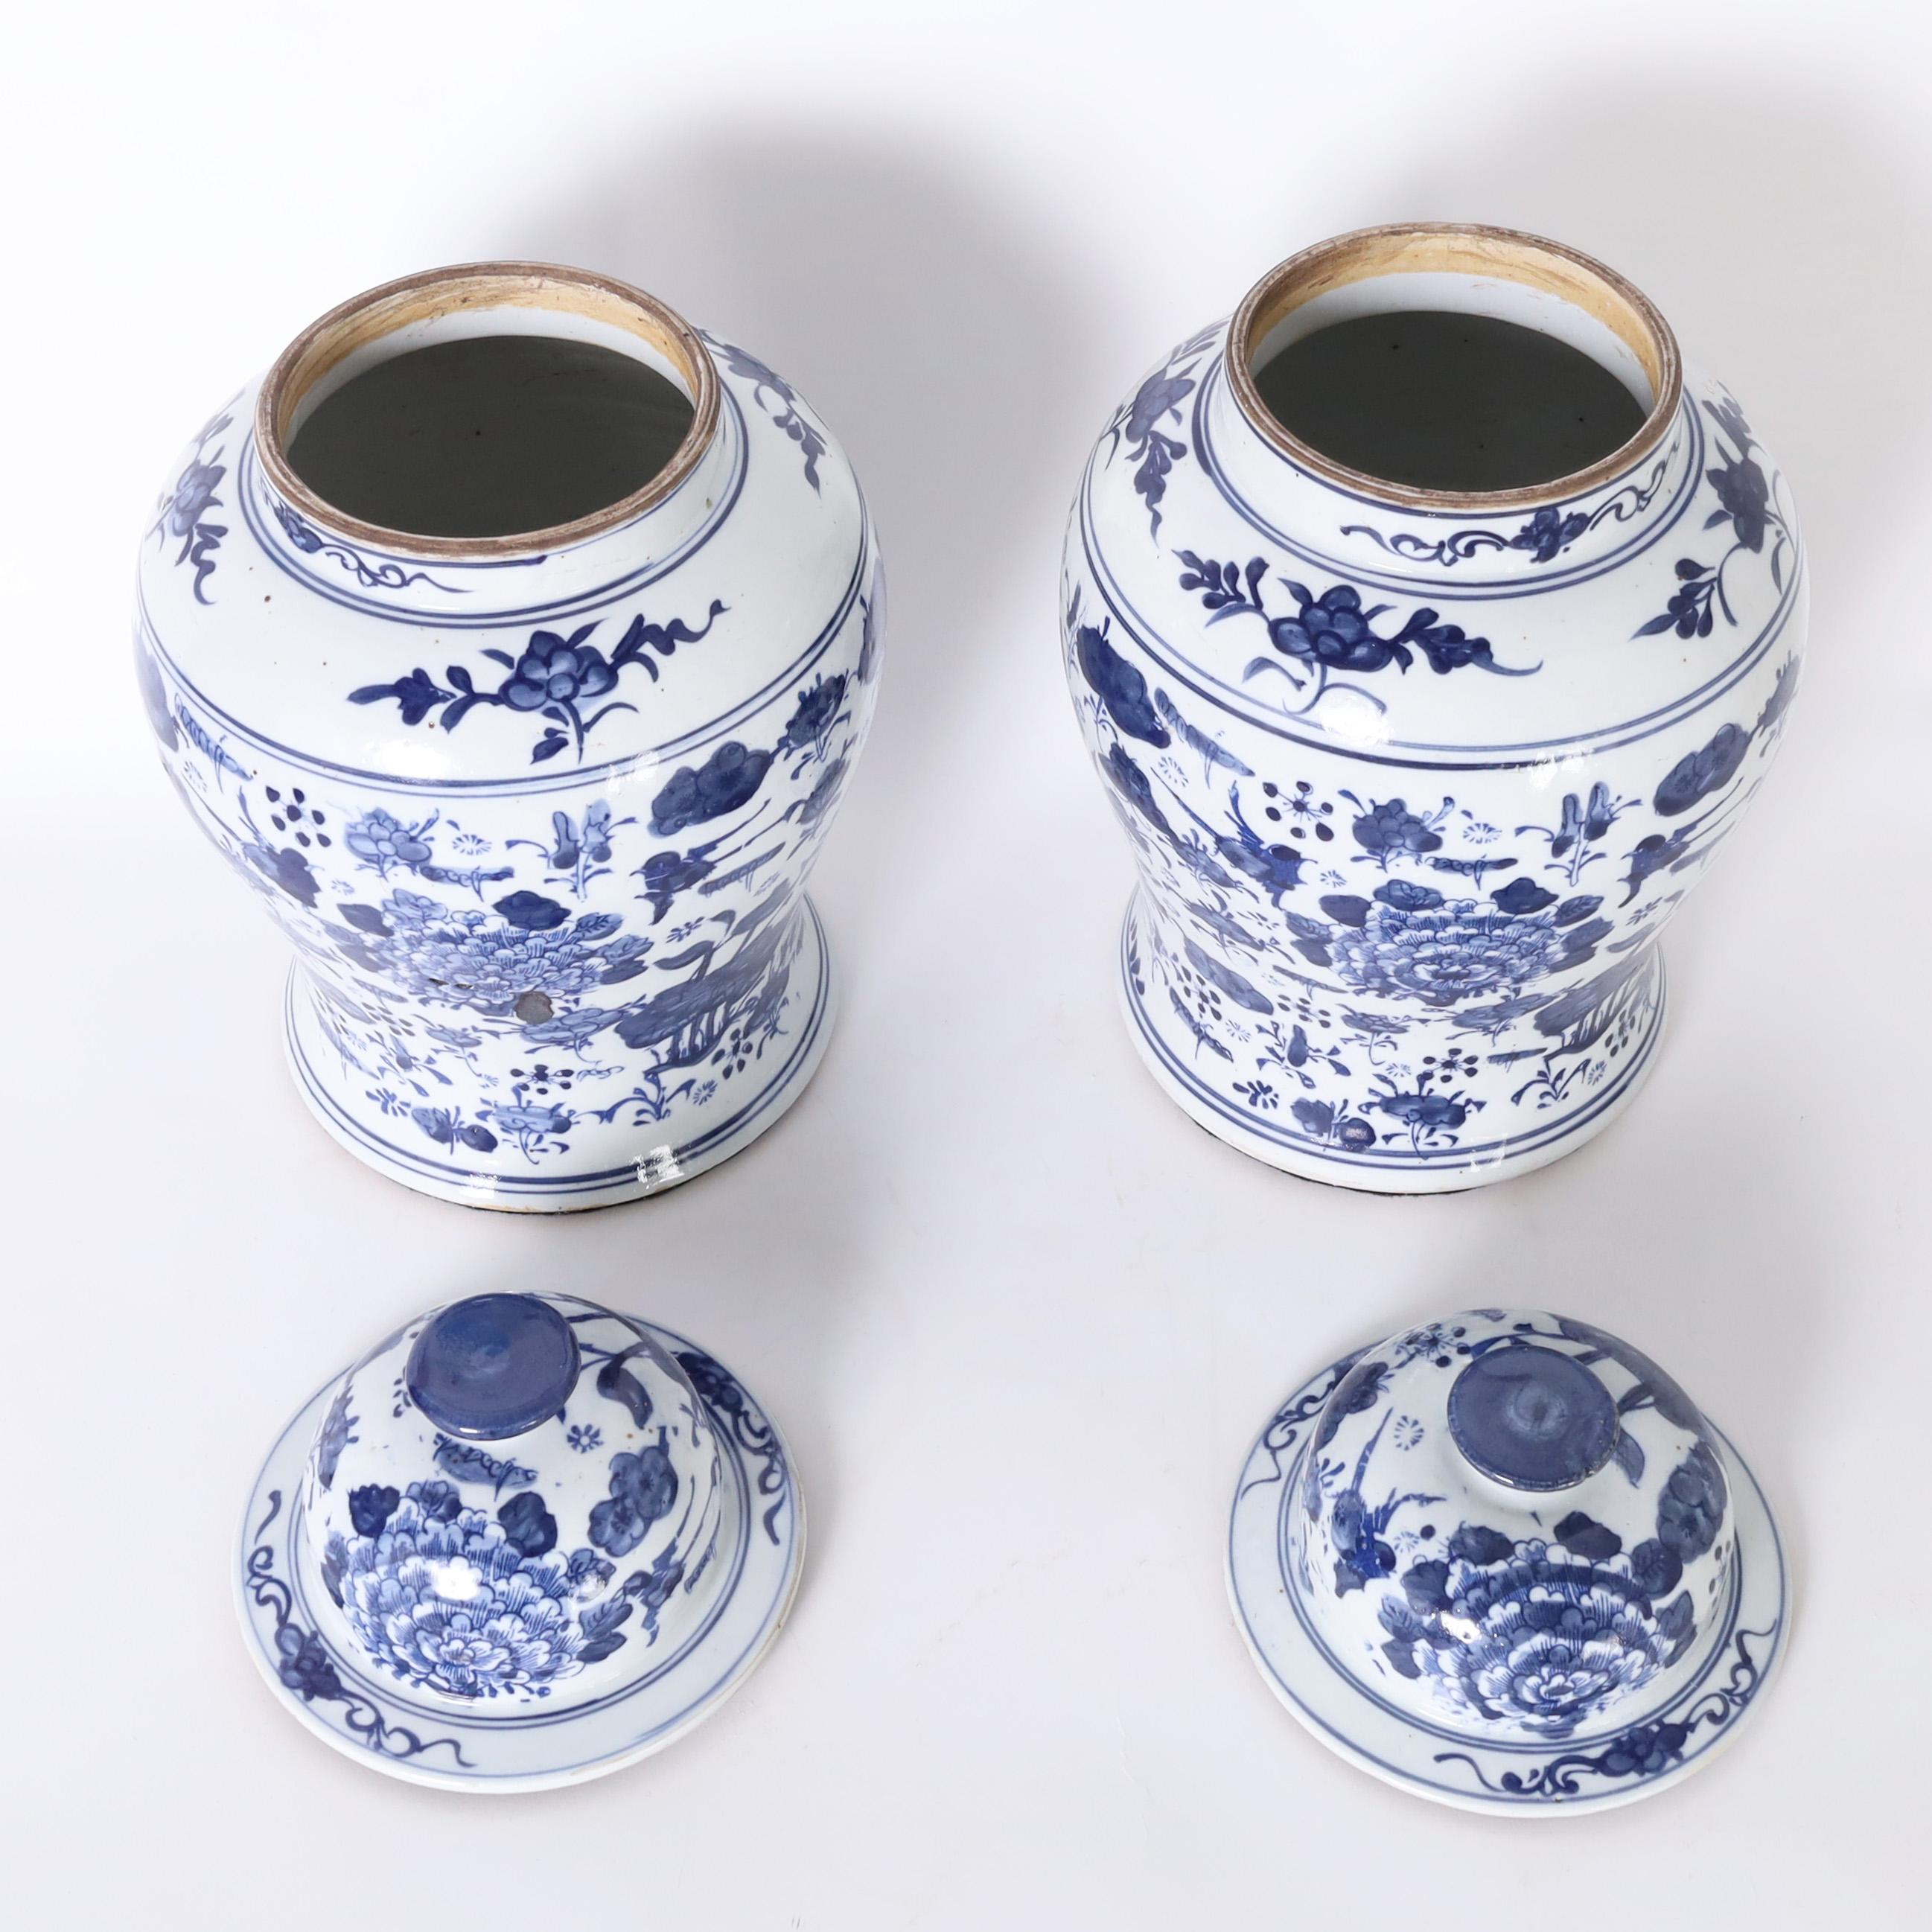 Lofty pair of Chinese blue and white porcelain lidded ginger jars with classic form and hand decorated with birds and flowers.